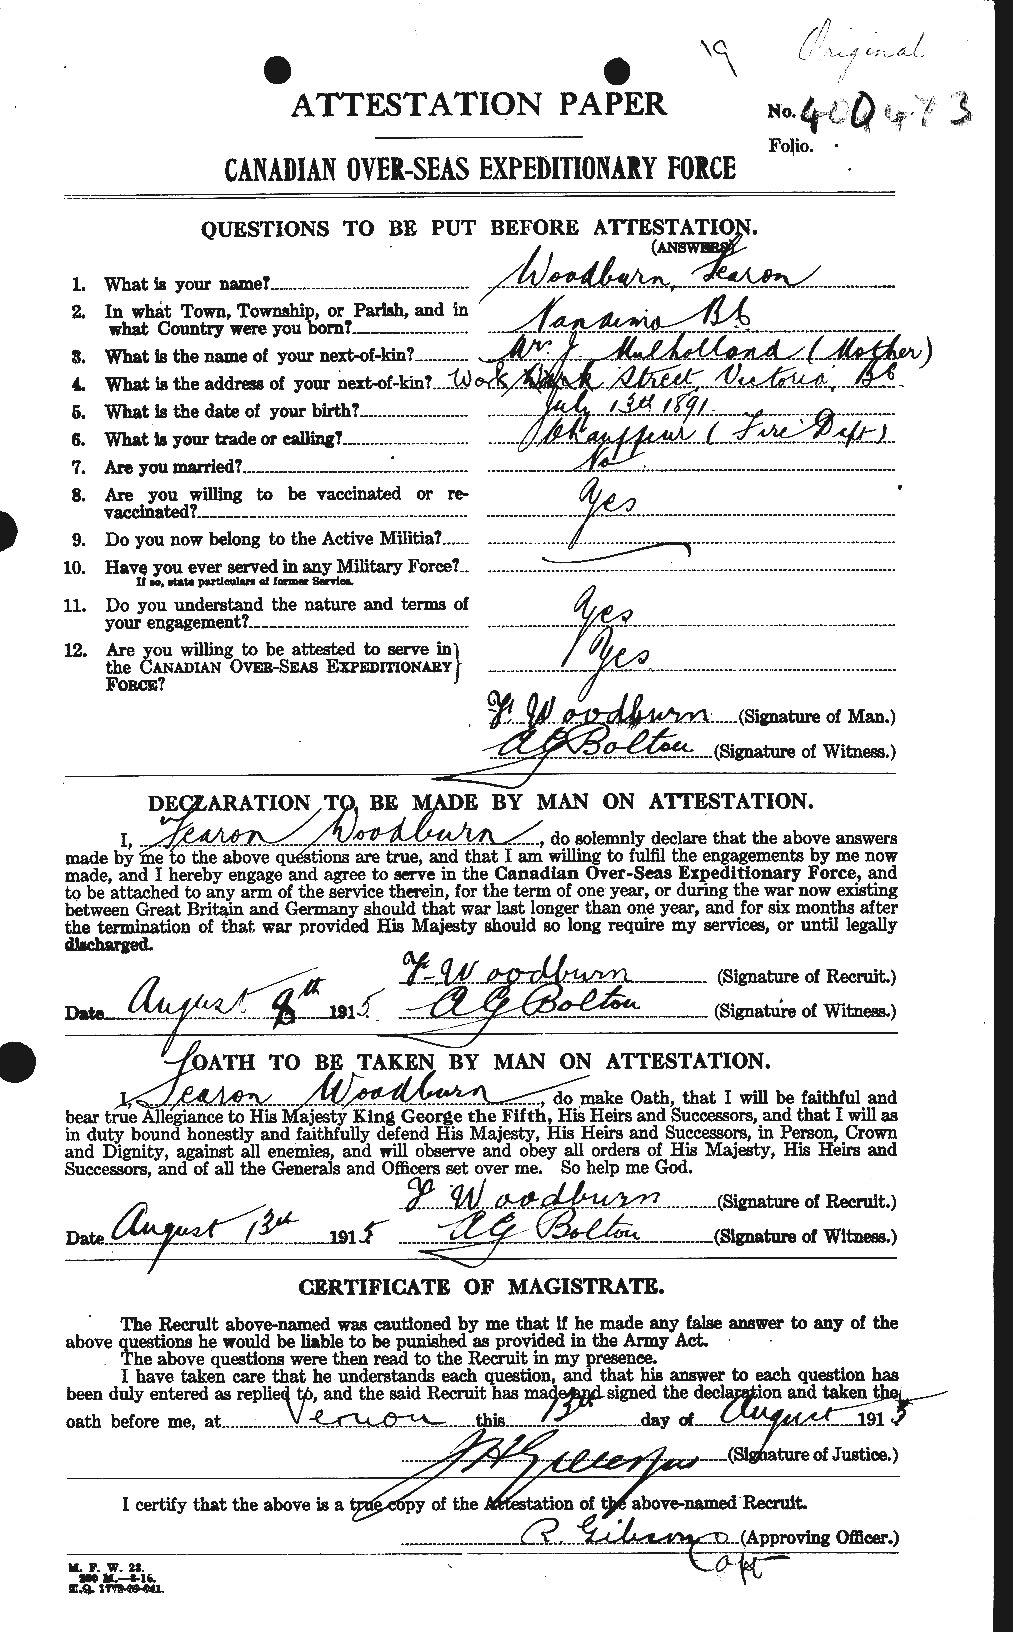 Personnel Records of the First World War - CEF 682744a